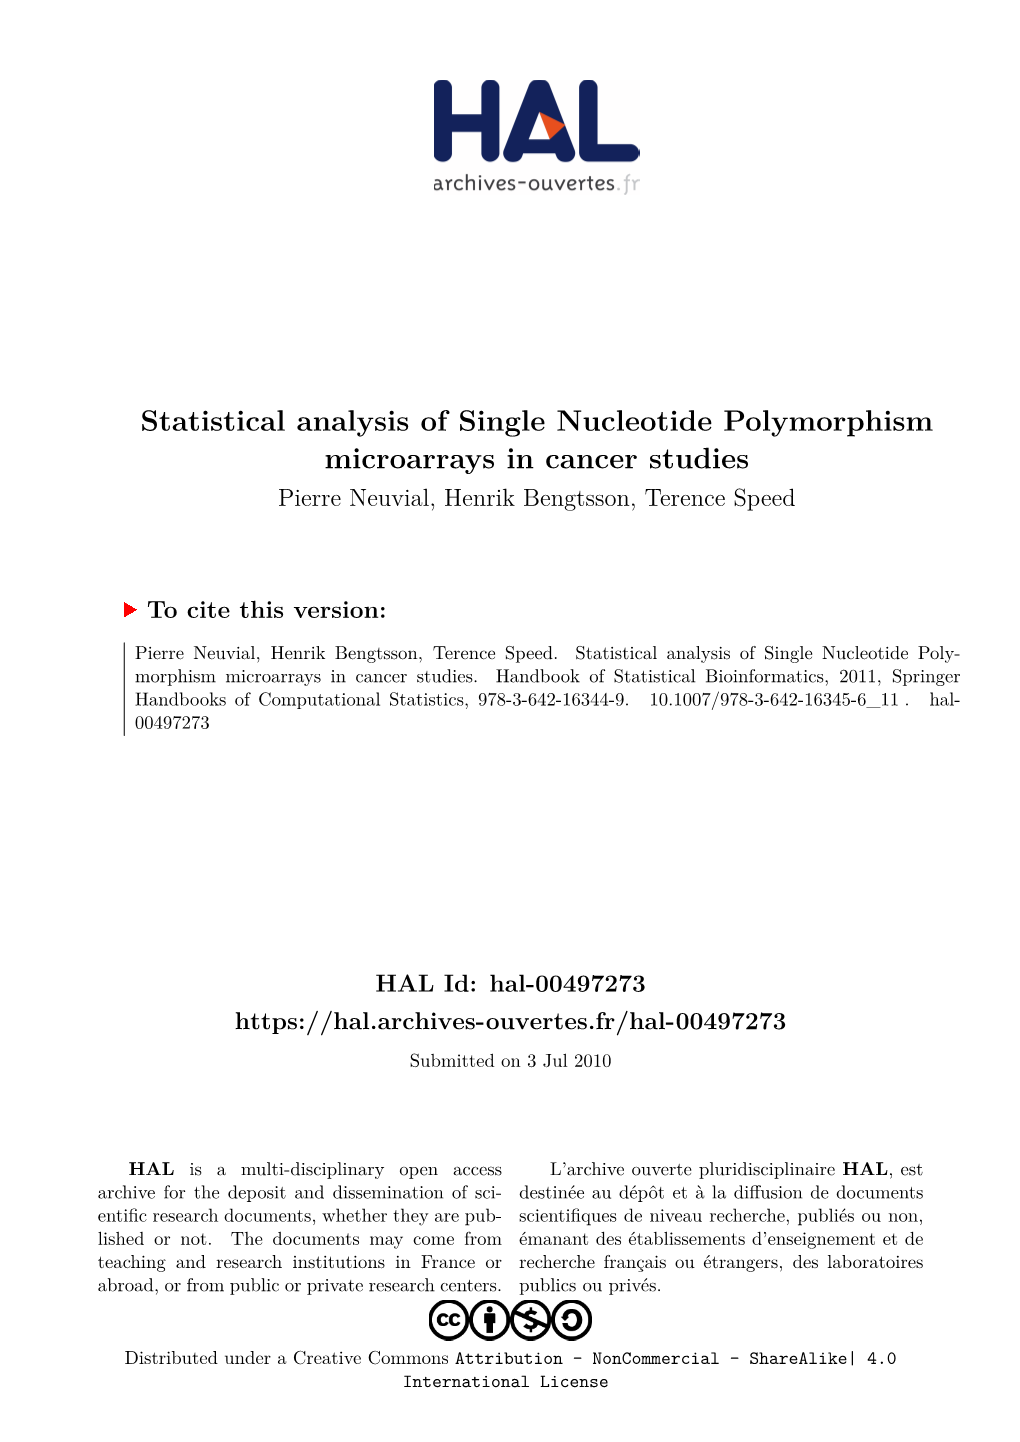 Statistical Analysis of Single Nucleotide Polymorphism Microarrays in Cancer Studies Pierre Neuvial, Henrik Bengtsson, Terence Speed